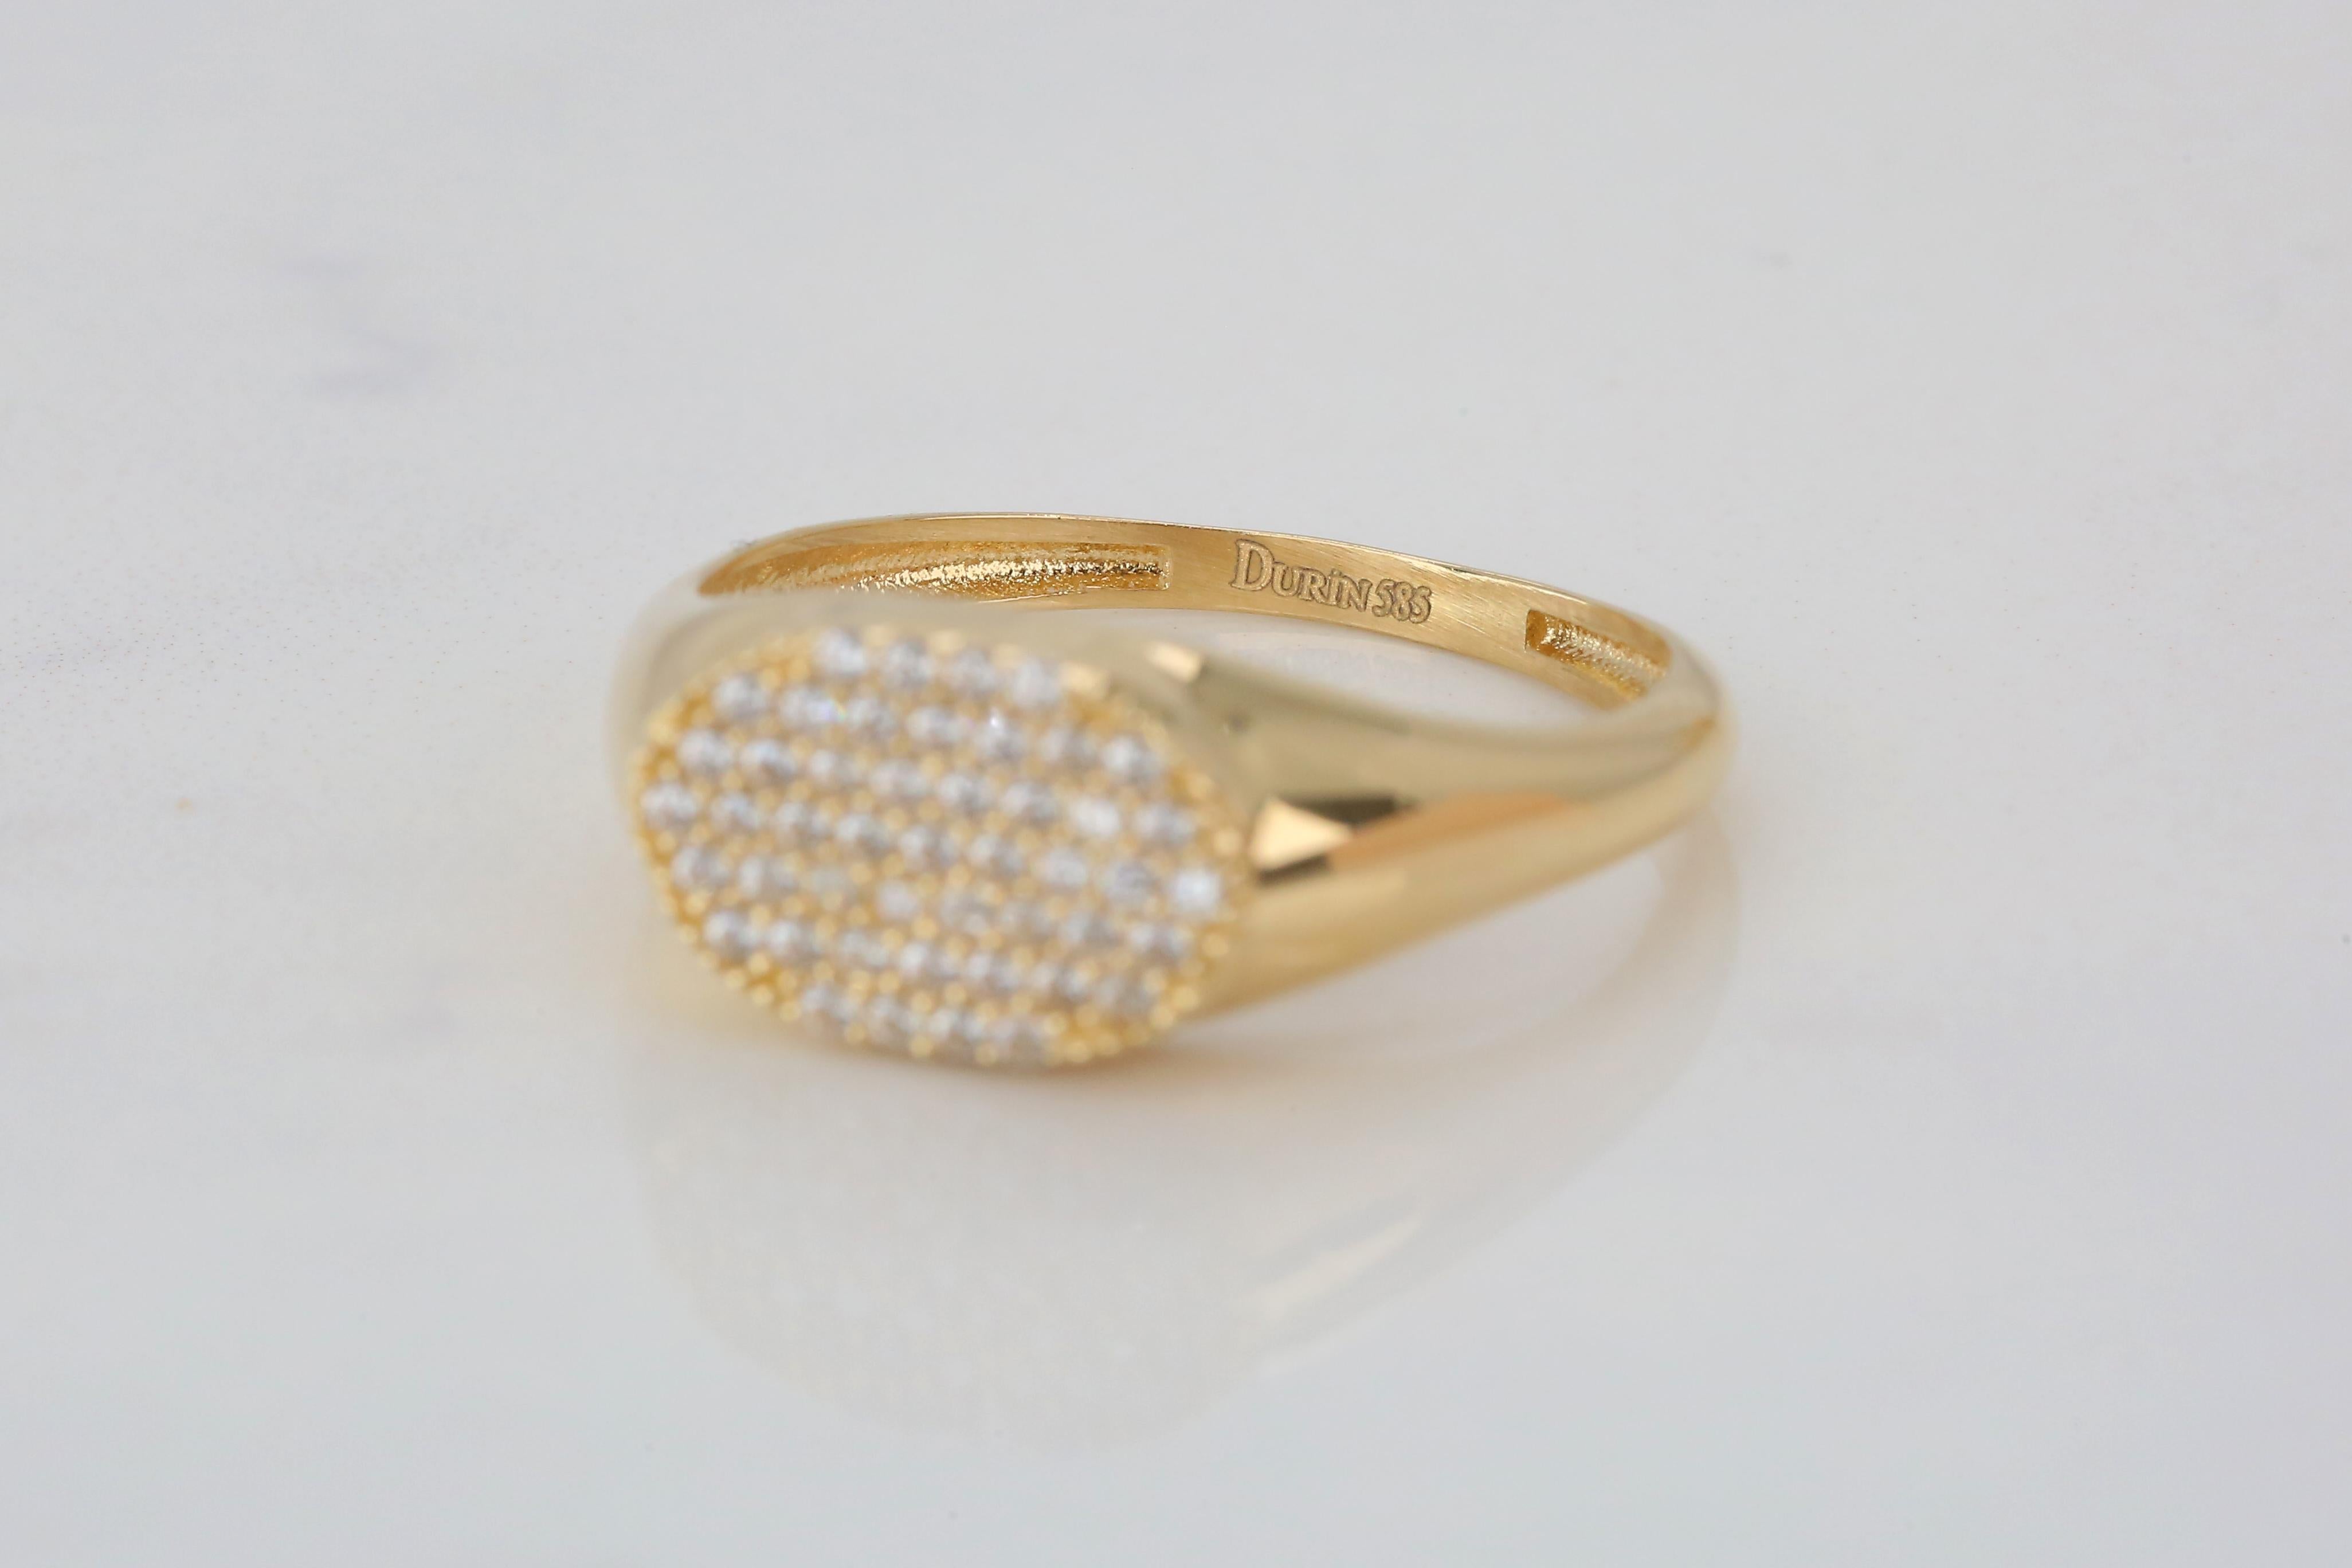 For Sale:  14k Gold Ring, Daily Gold Jewelry, Gift Rings, Combined Ring, Stone Ring 7